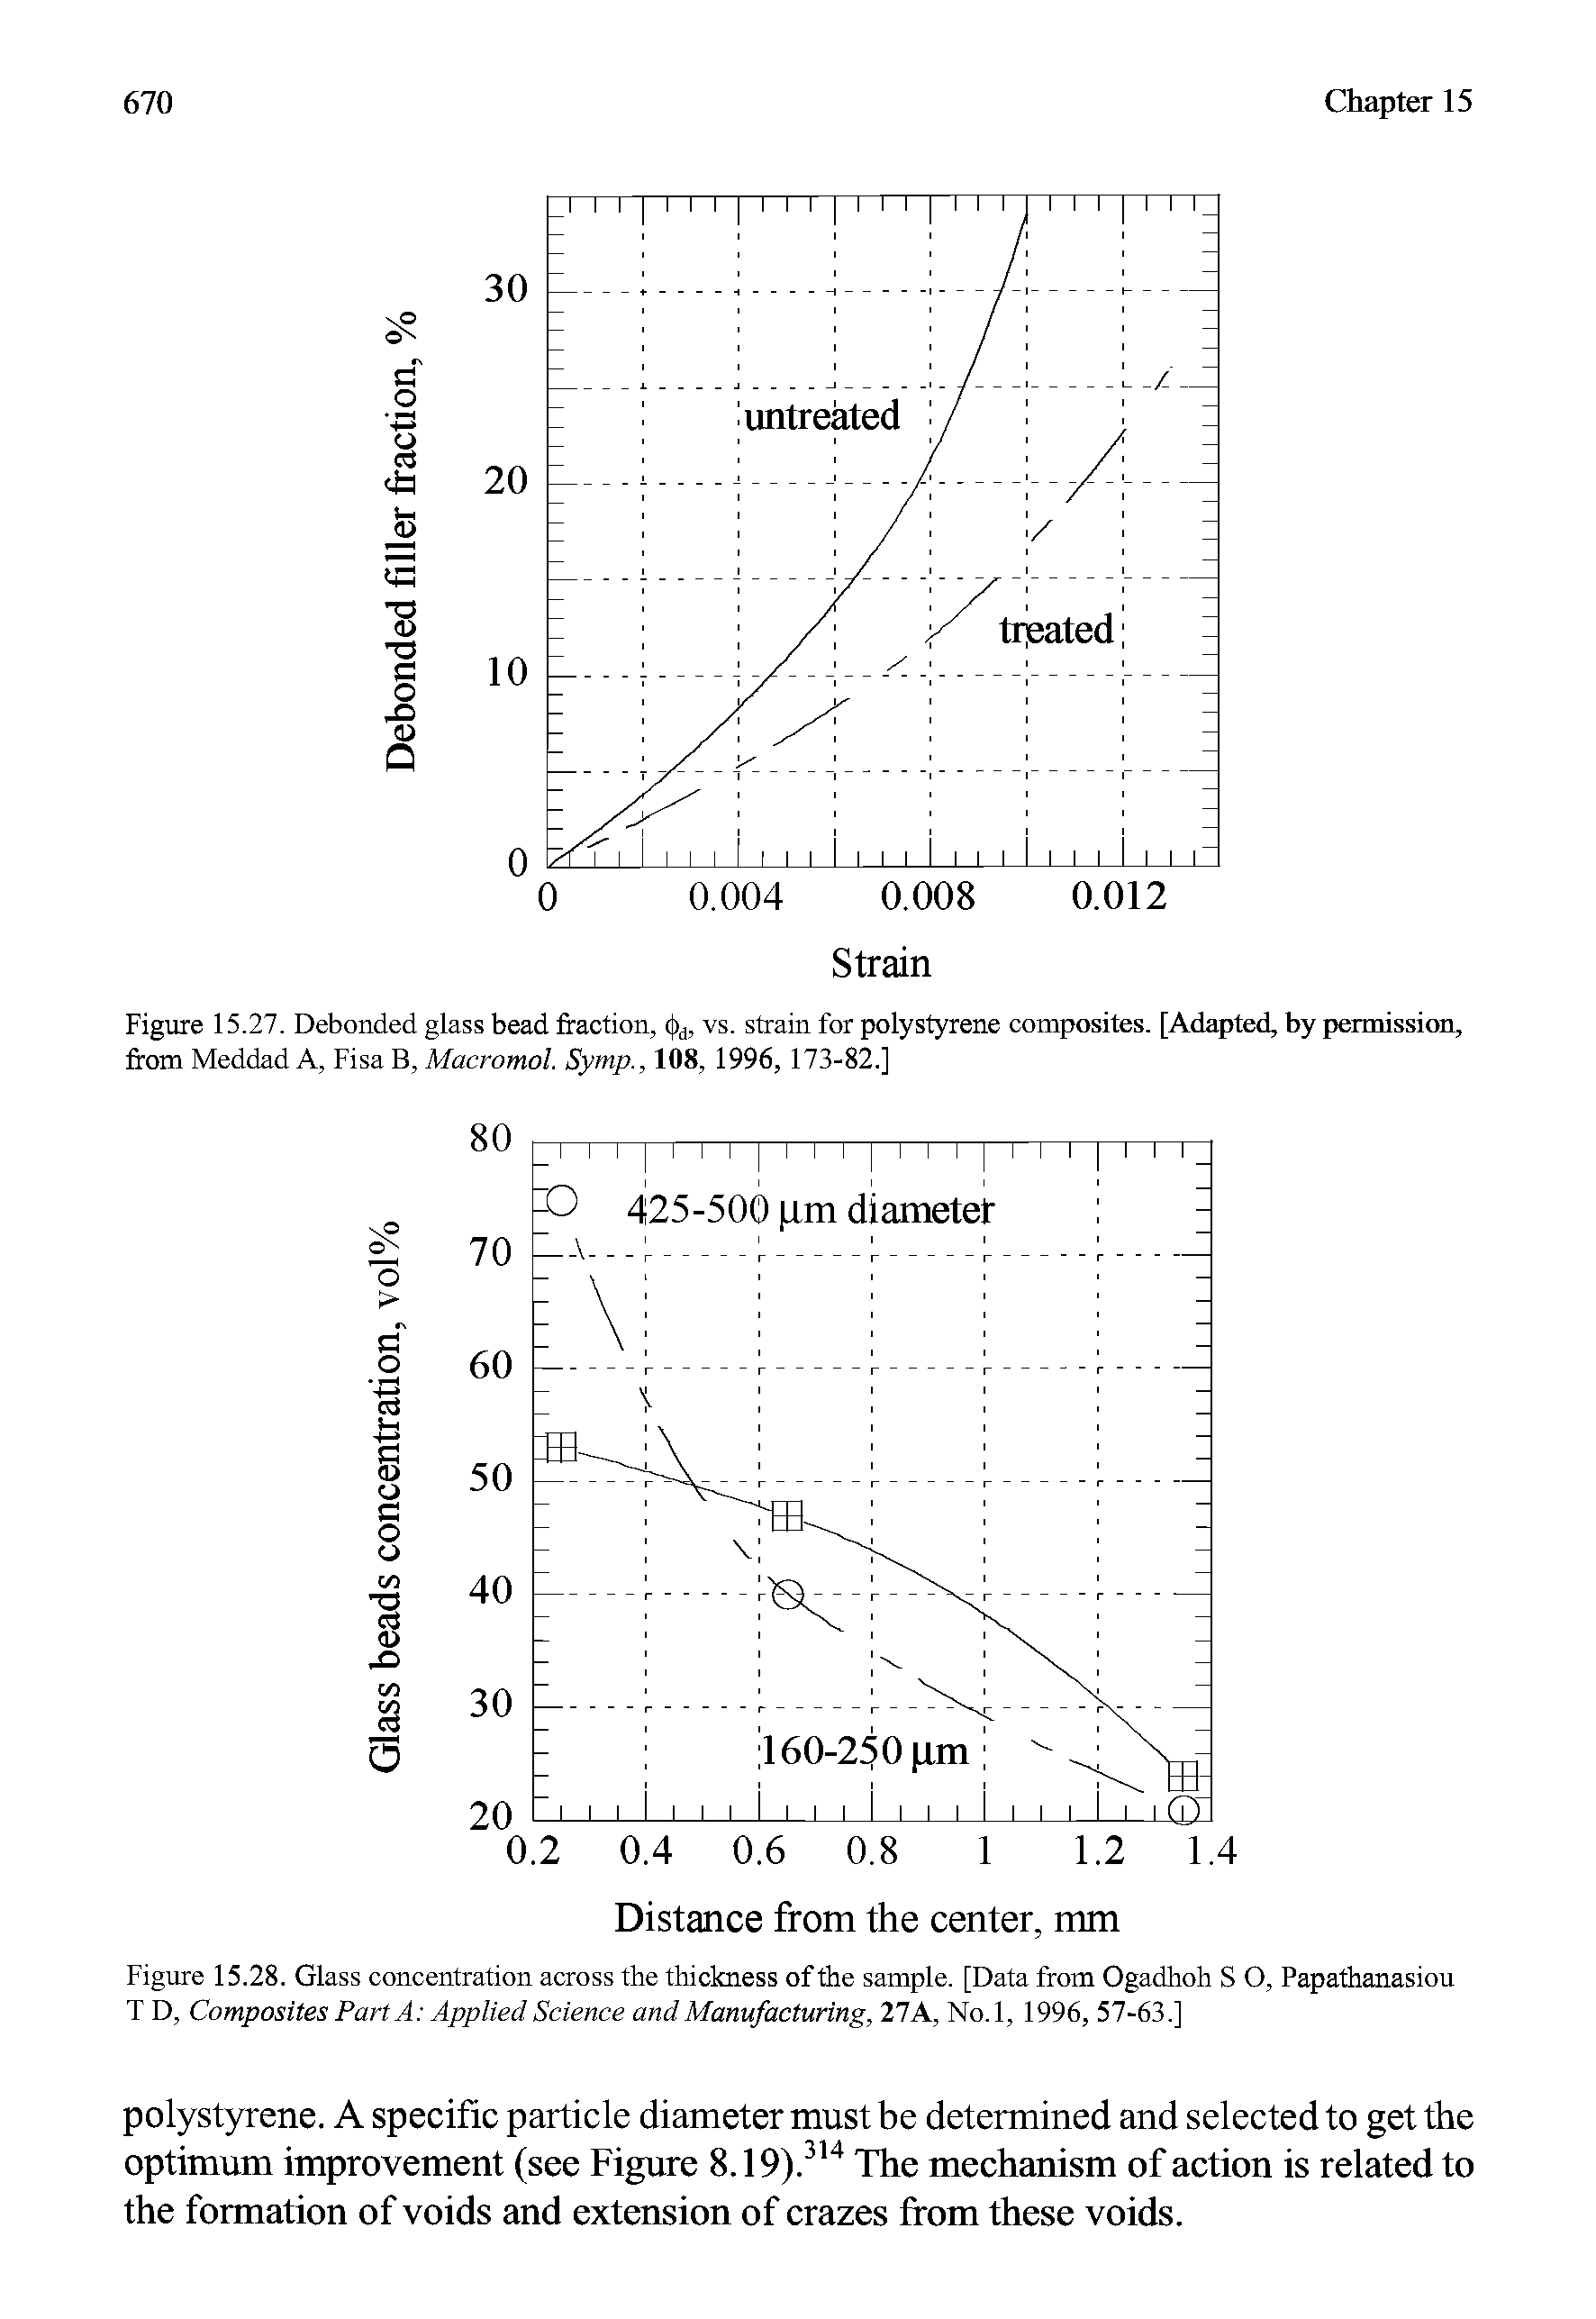 Figure 15.27. Debonded glass bead fraction, vs. strain for polystyrene composites. [Adapted, by permission, from Meddad A, Fisa B, Macromol. Symp., 108. 1996, 173-82.]...